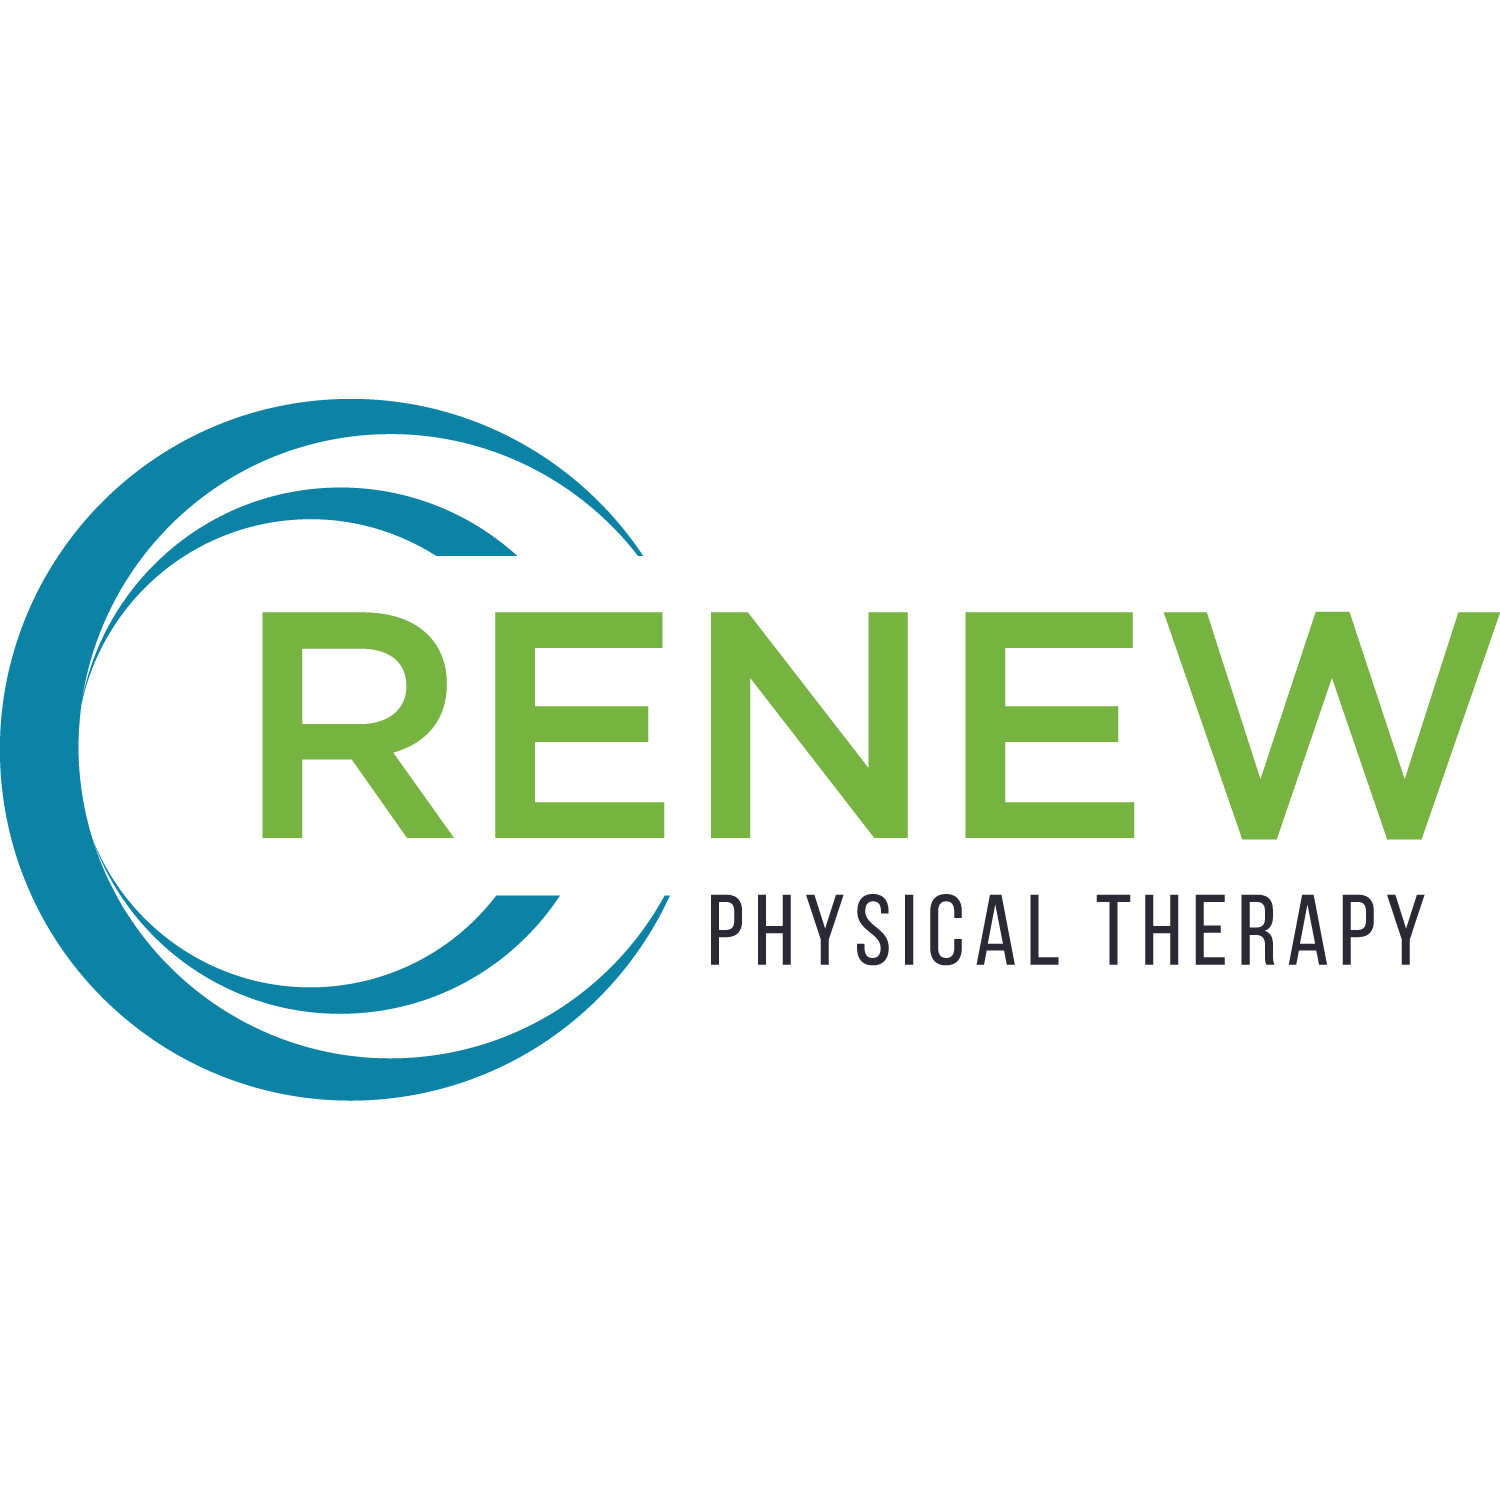 Renew Physical Therapy - Beacon Hill Clinic - Seattle, WA 98108 - (206)620-1589 | ShowMeLocal.com